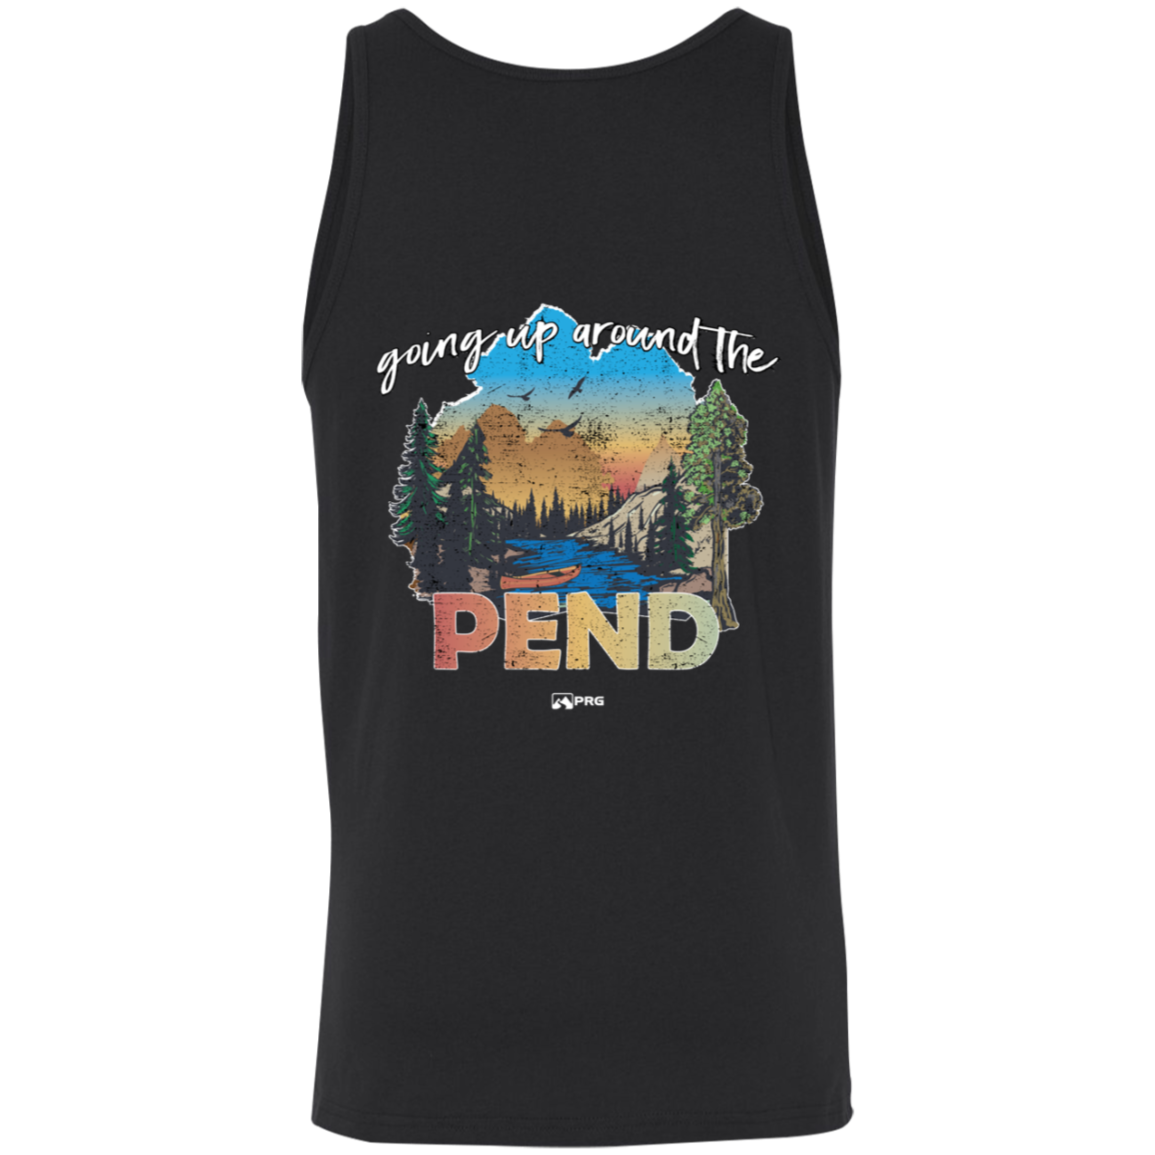 Around the Pend (Front & Back) - Tank